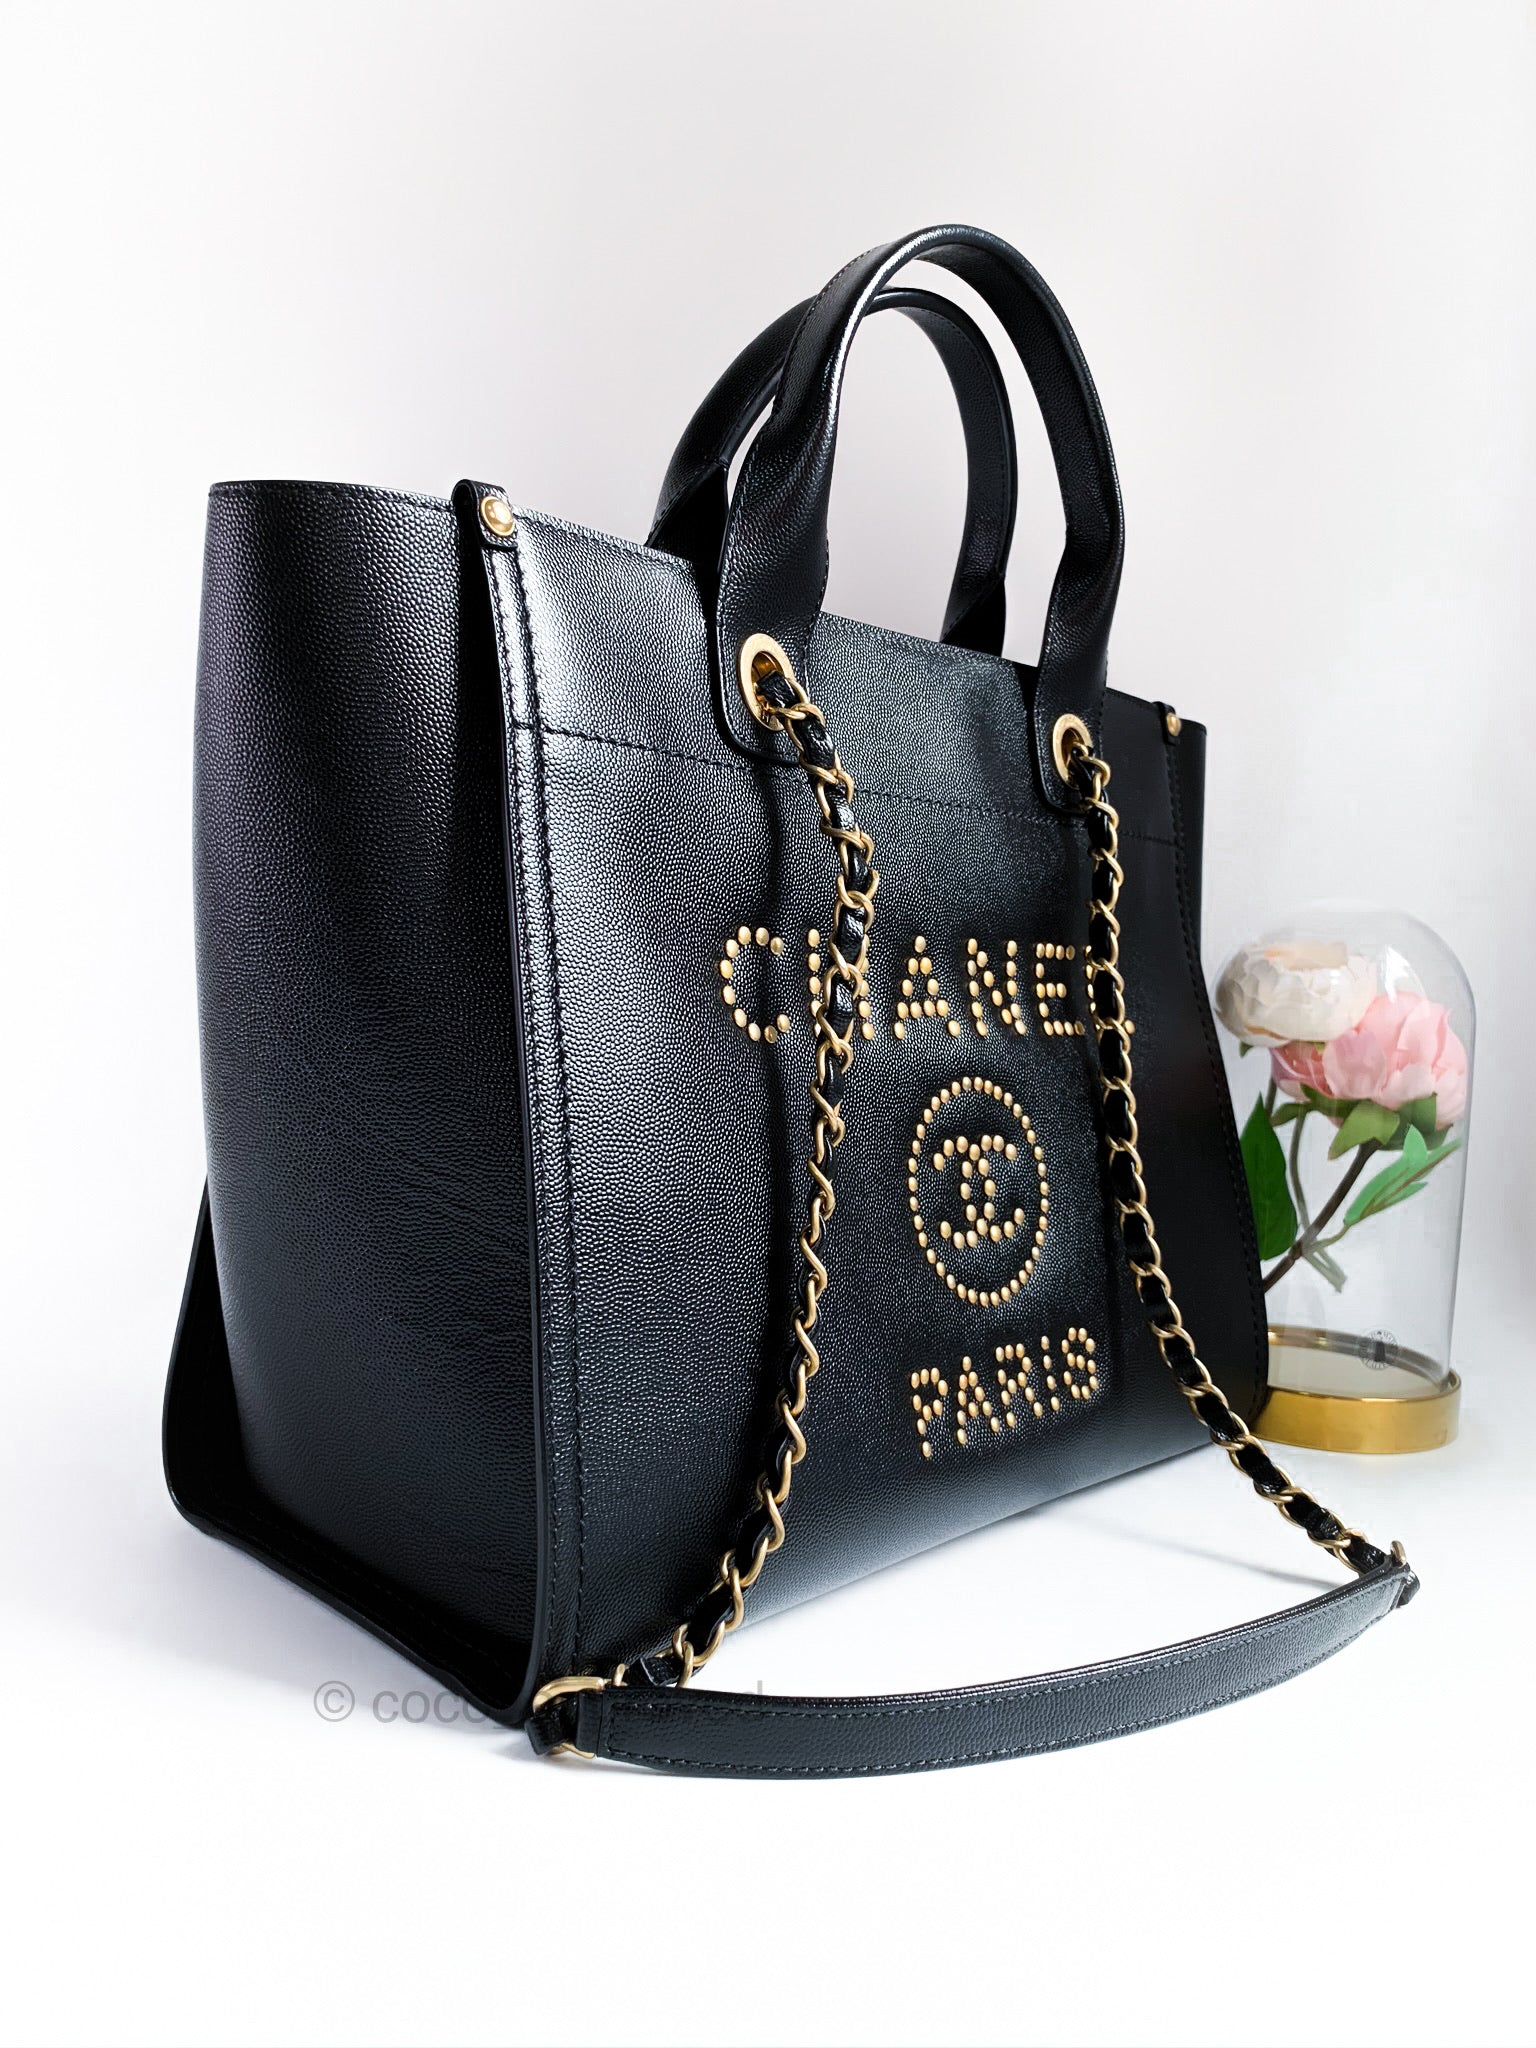 Chanel Caviar Black Studded Small Deauville Tote Bag